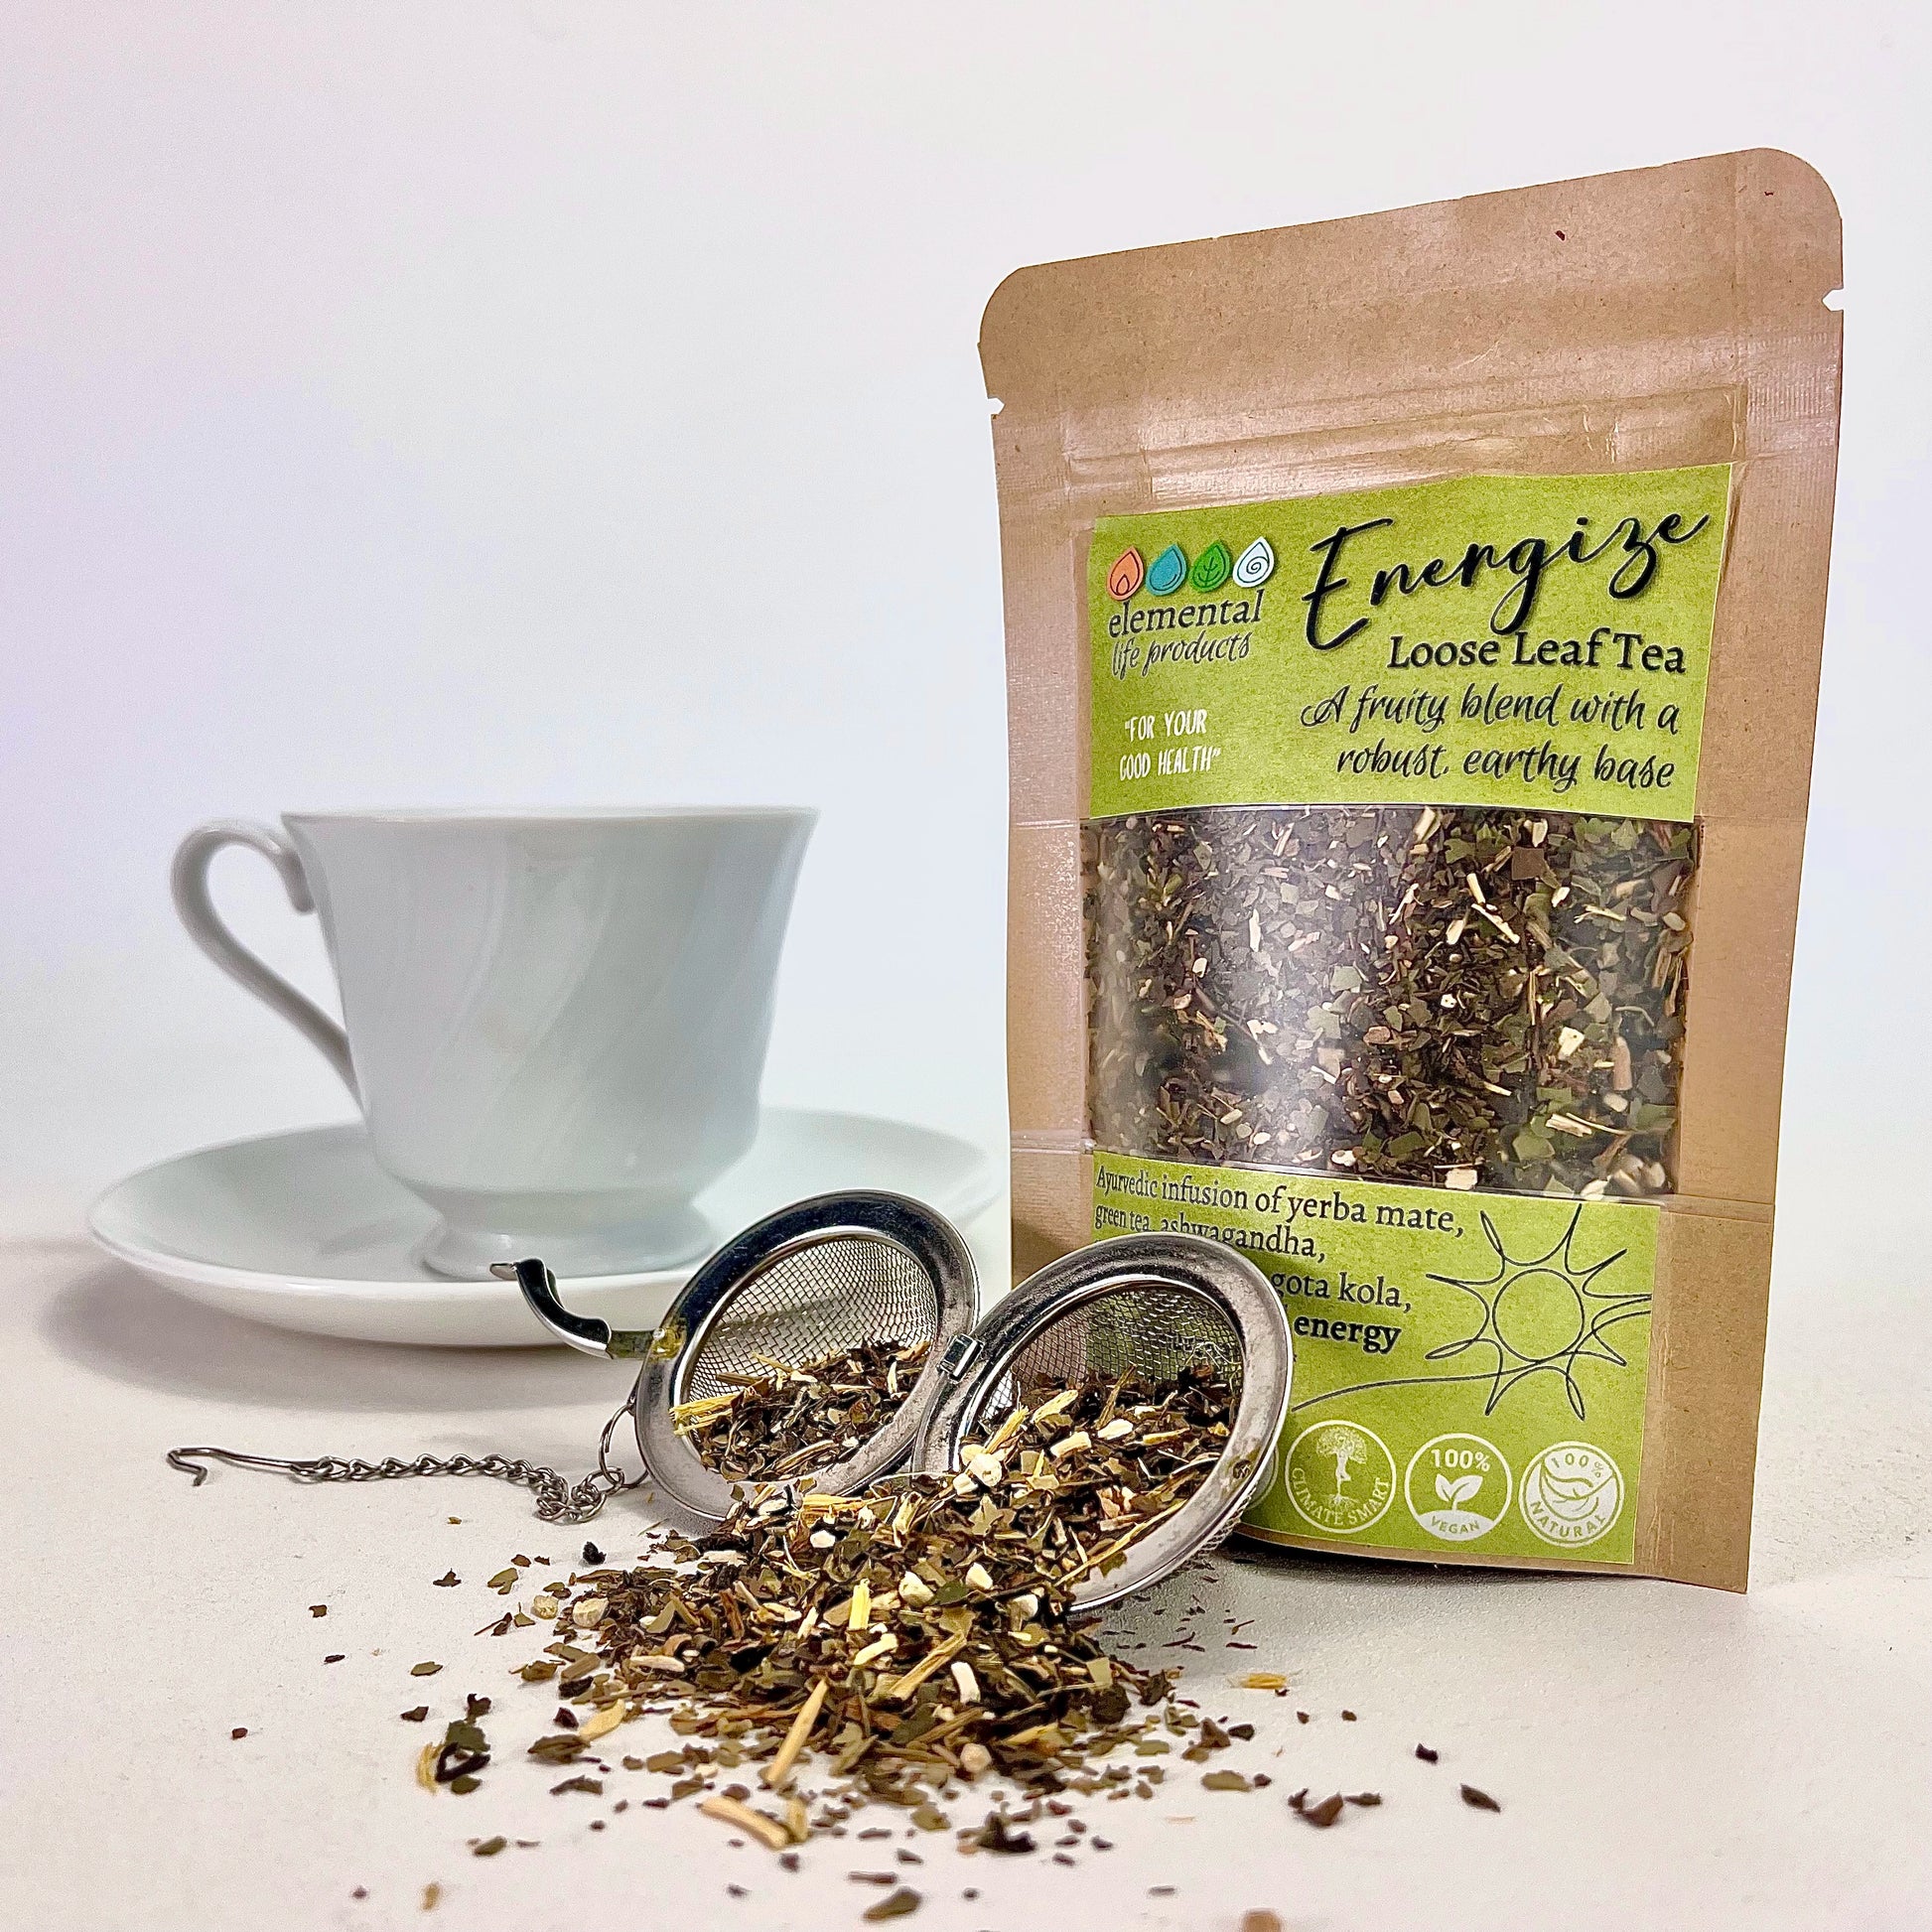 Elemental Life Product's Energize loose leaf tea blend with yerba mate, green tea, and ashwagandha with tea ball and tea cup